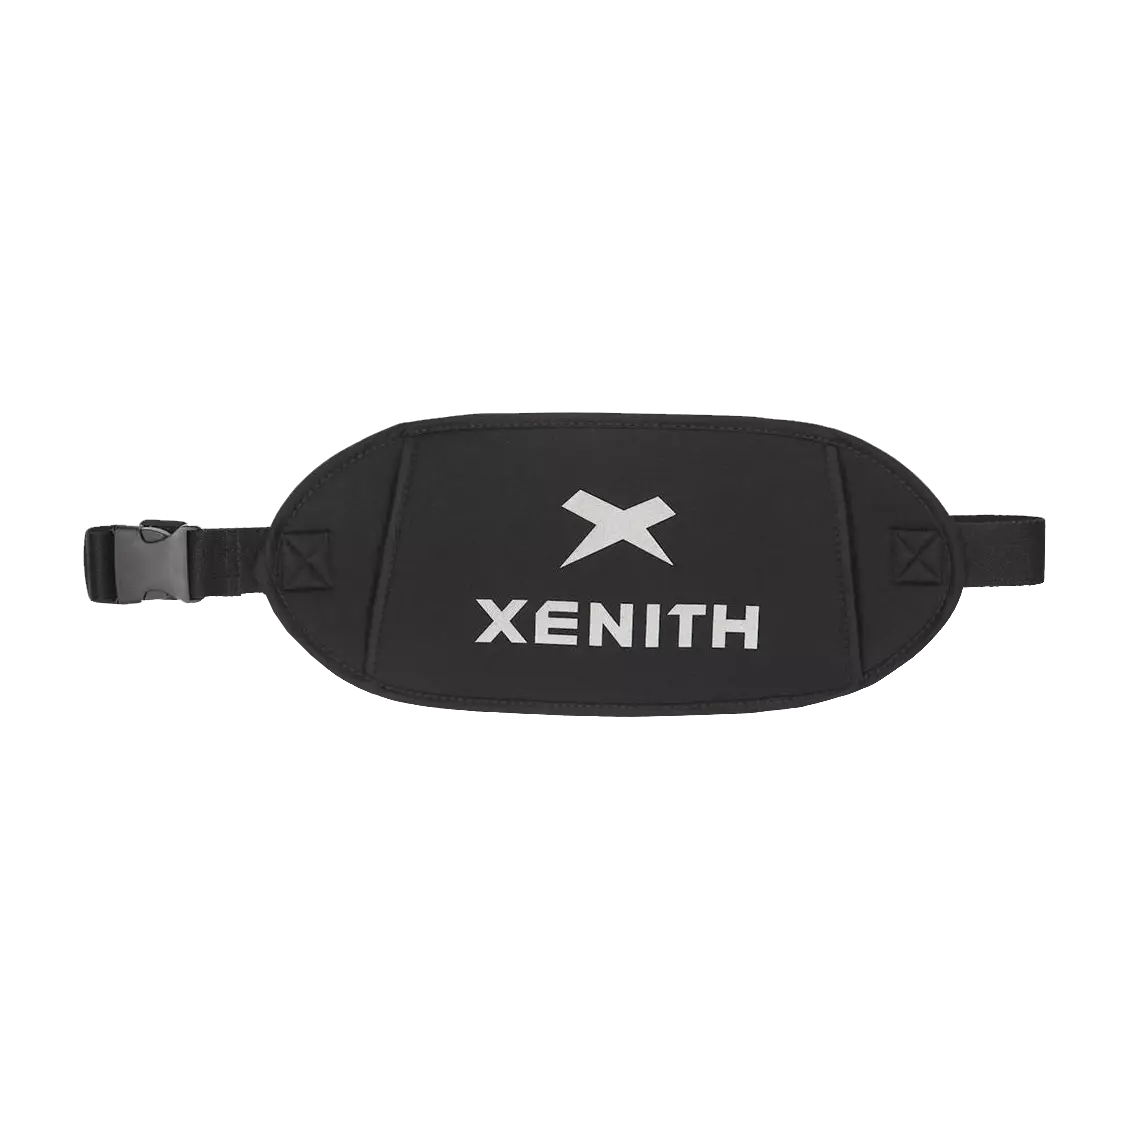 Front facing view of black Xenith hand warmer with white logo.